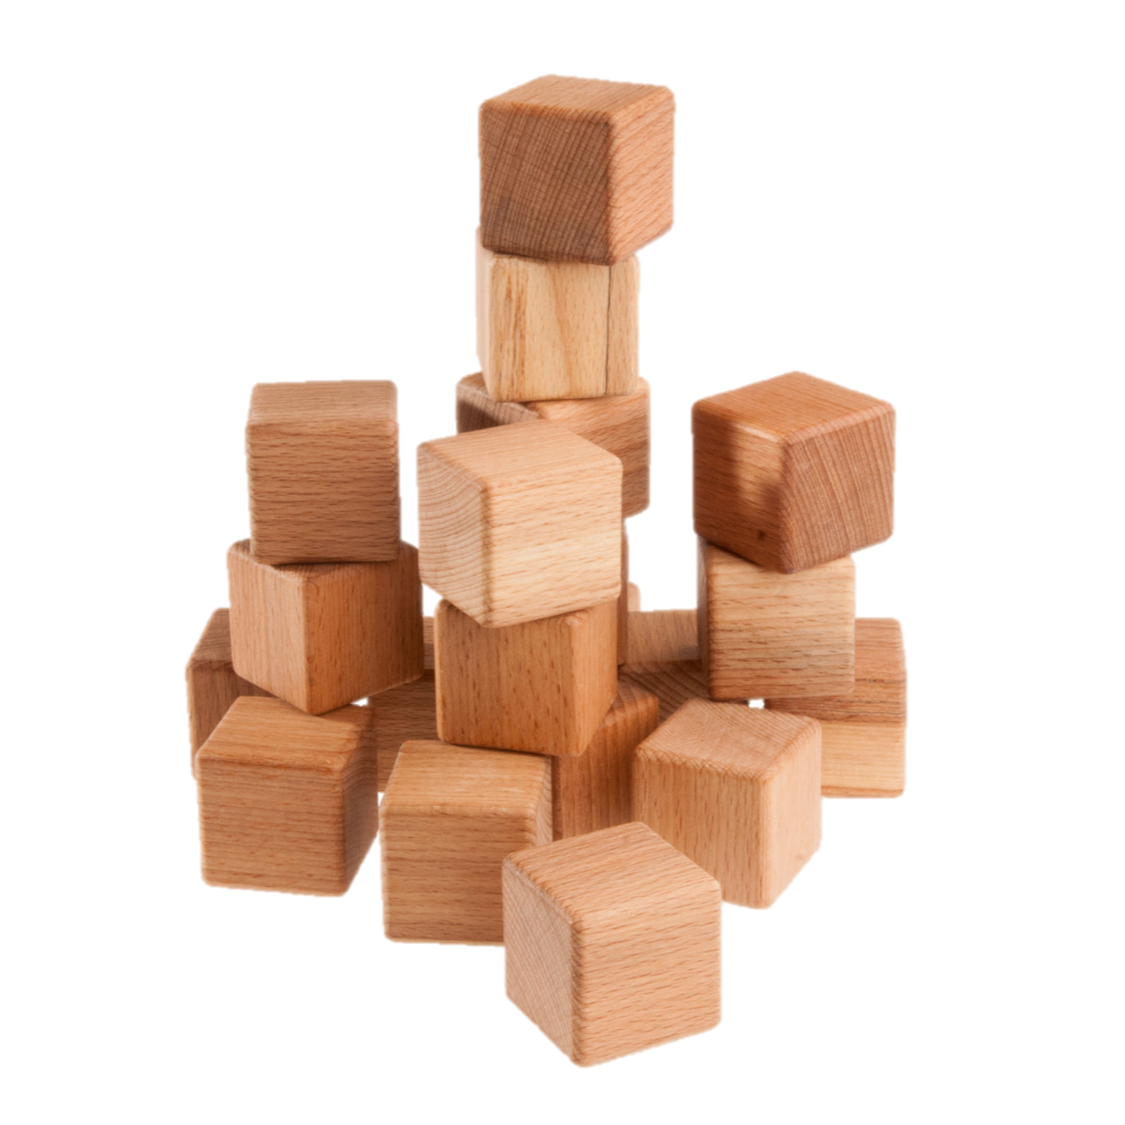 Classic Wooden Blocks for toddlers, 20- pieces